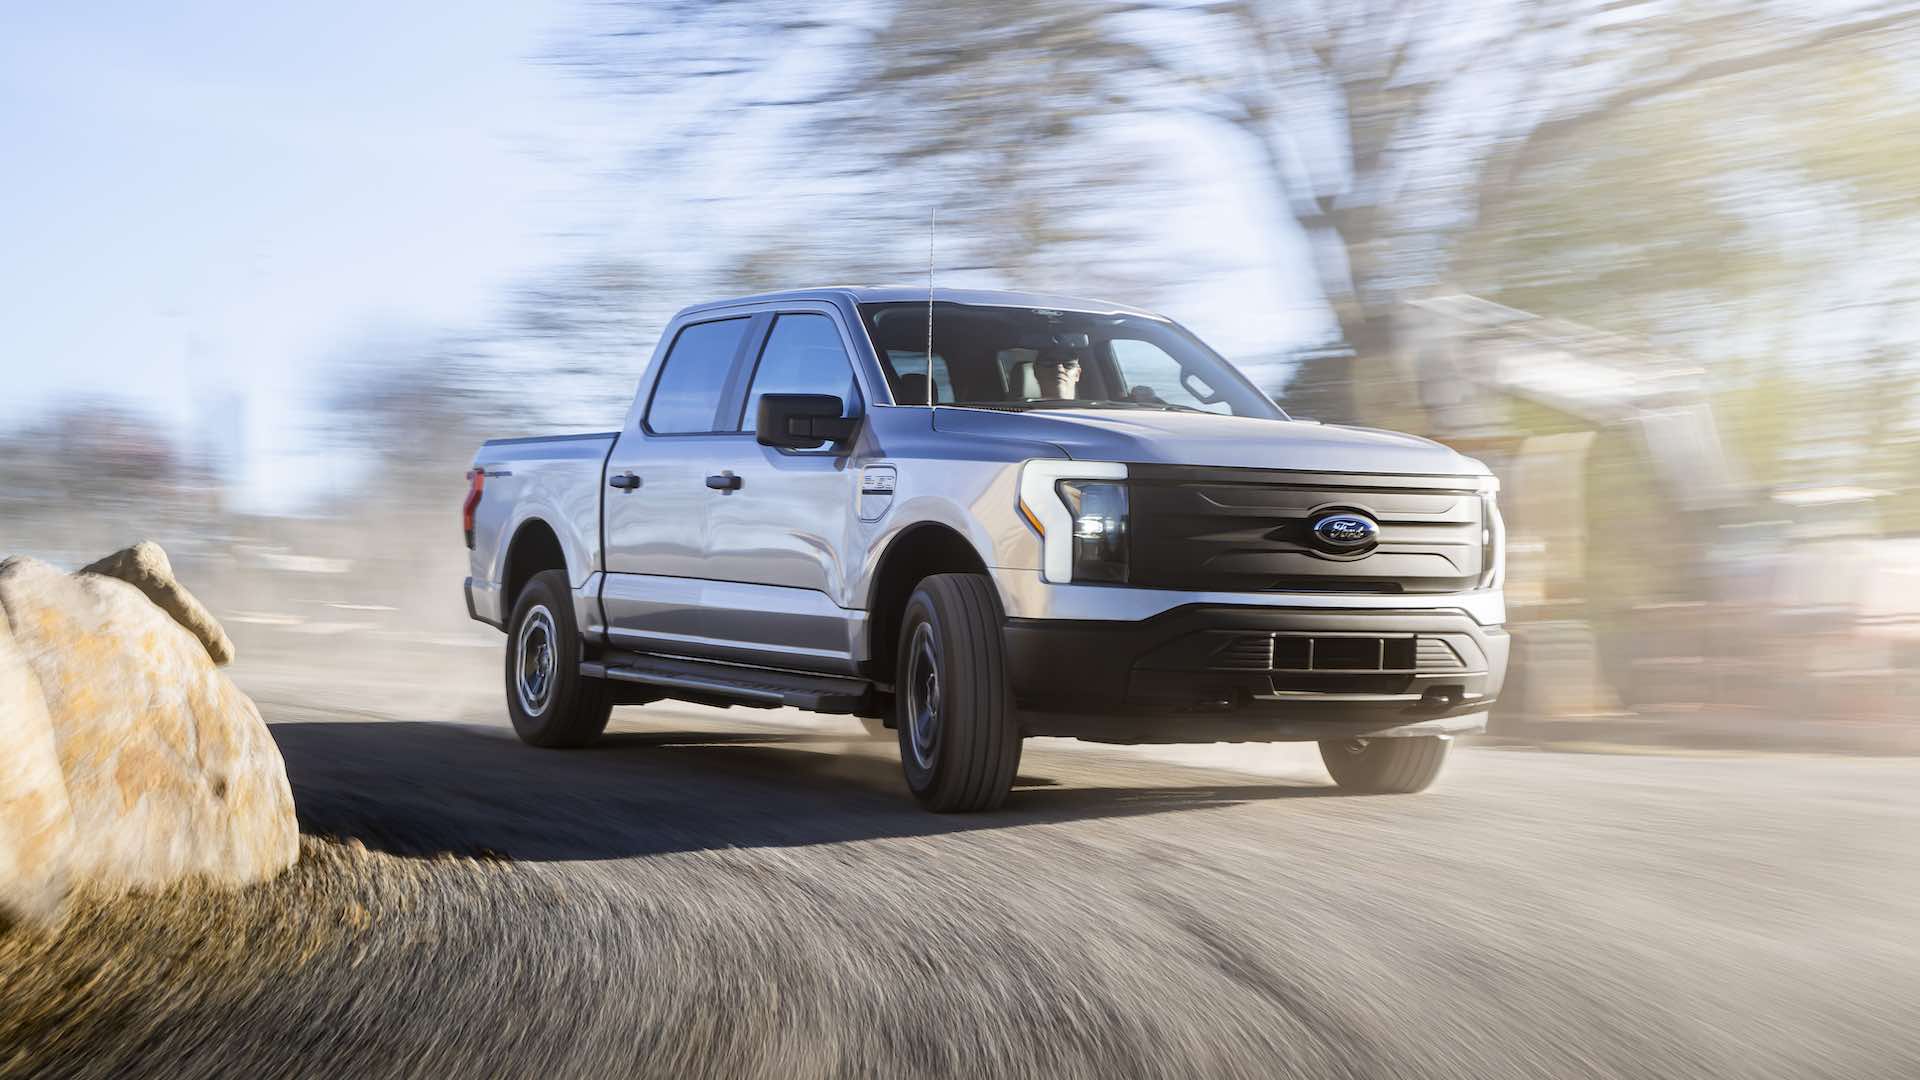 Ford announces recall of 870,000 F-150 trucks pver parking brake concerns